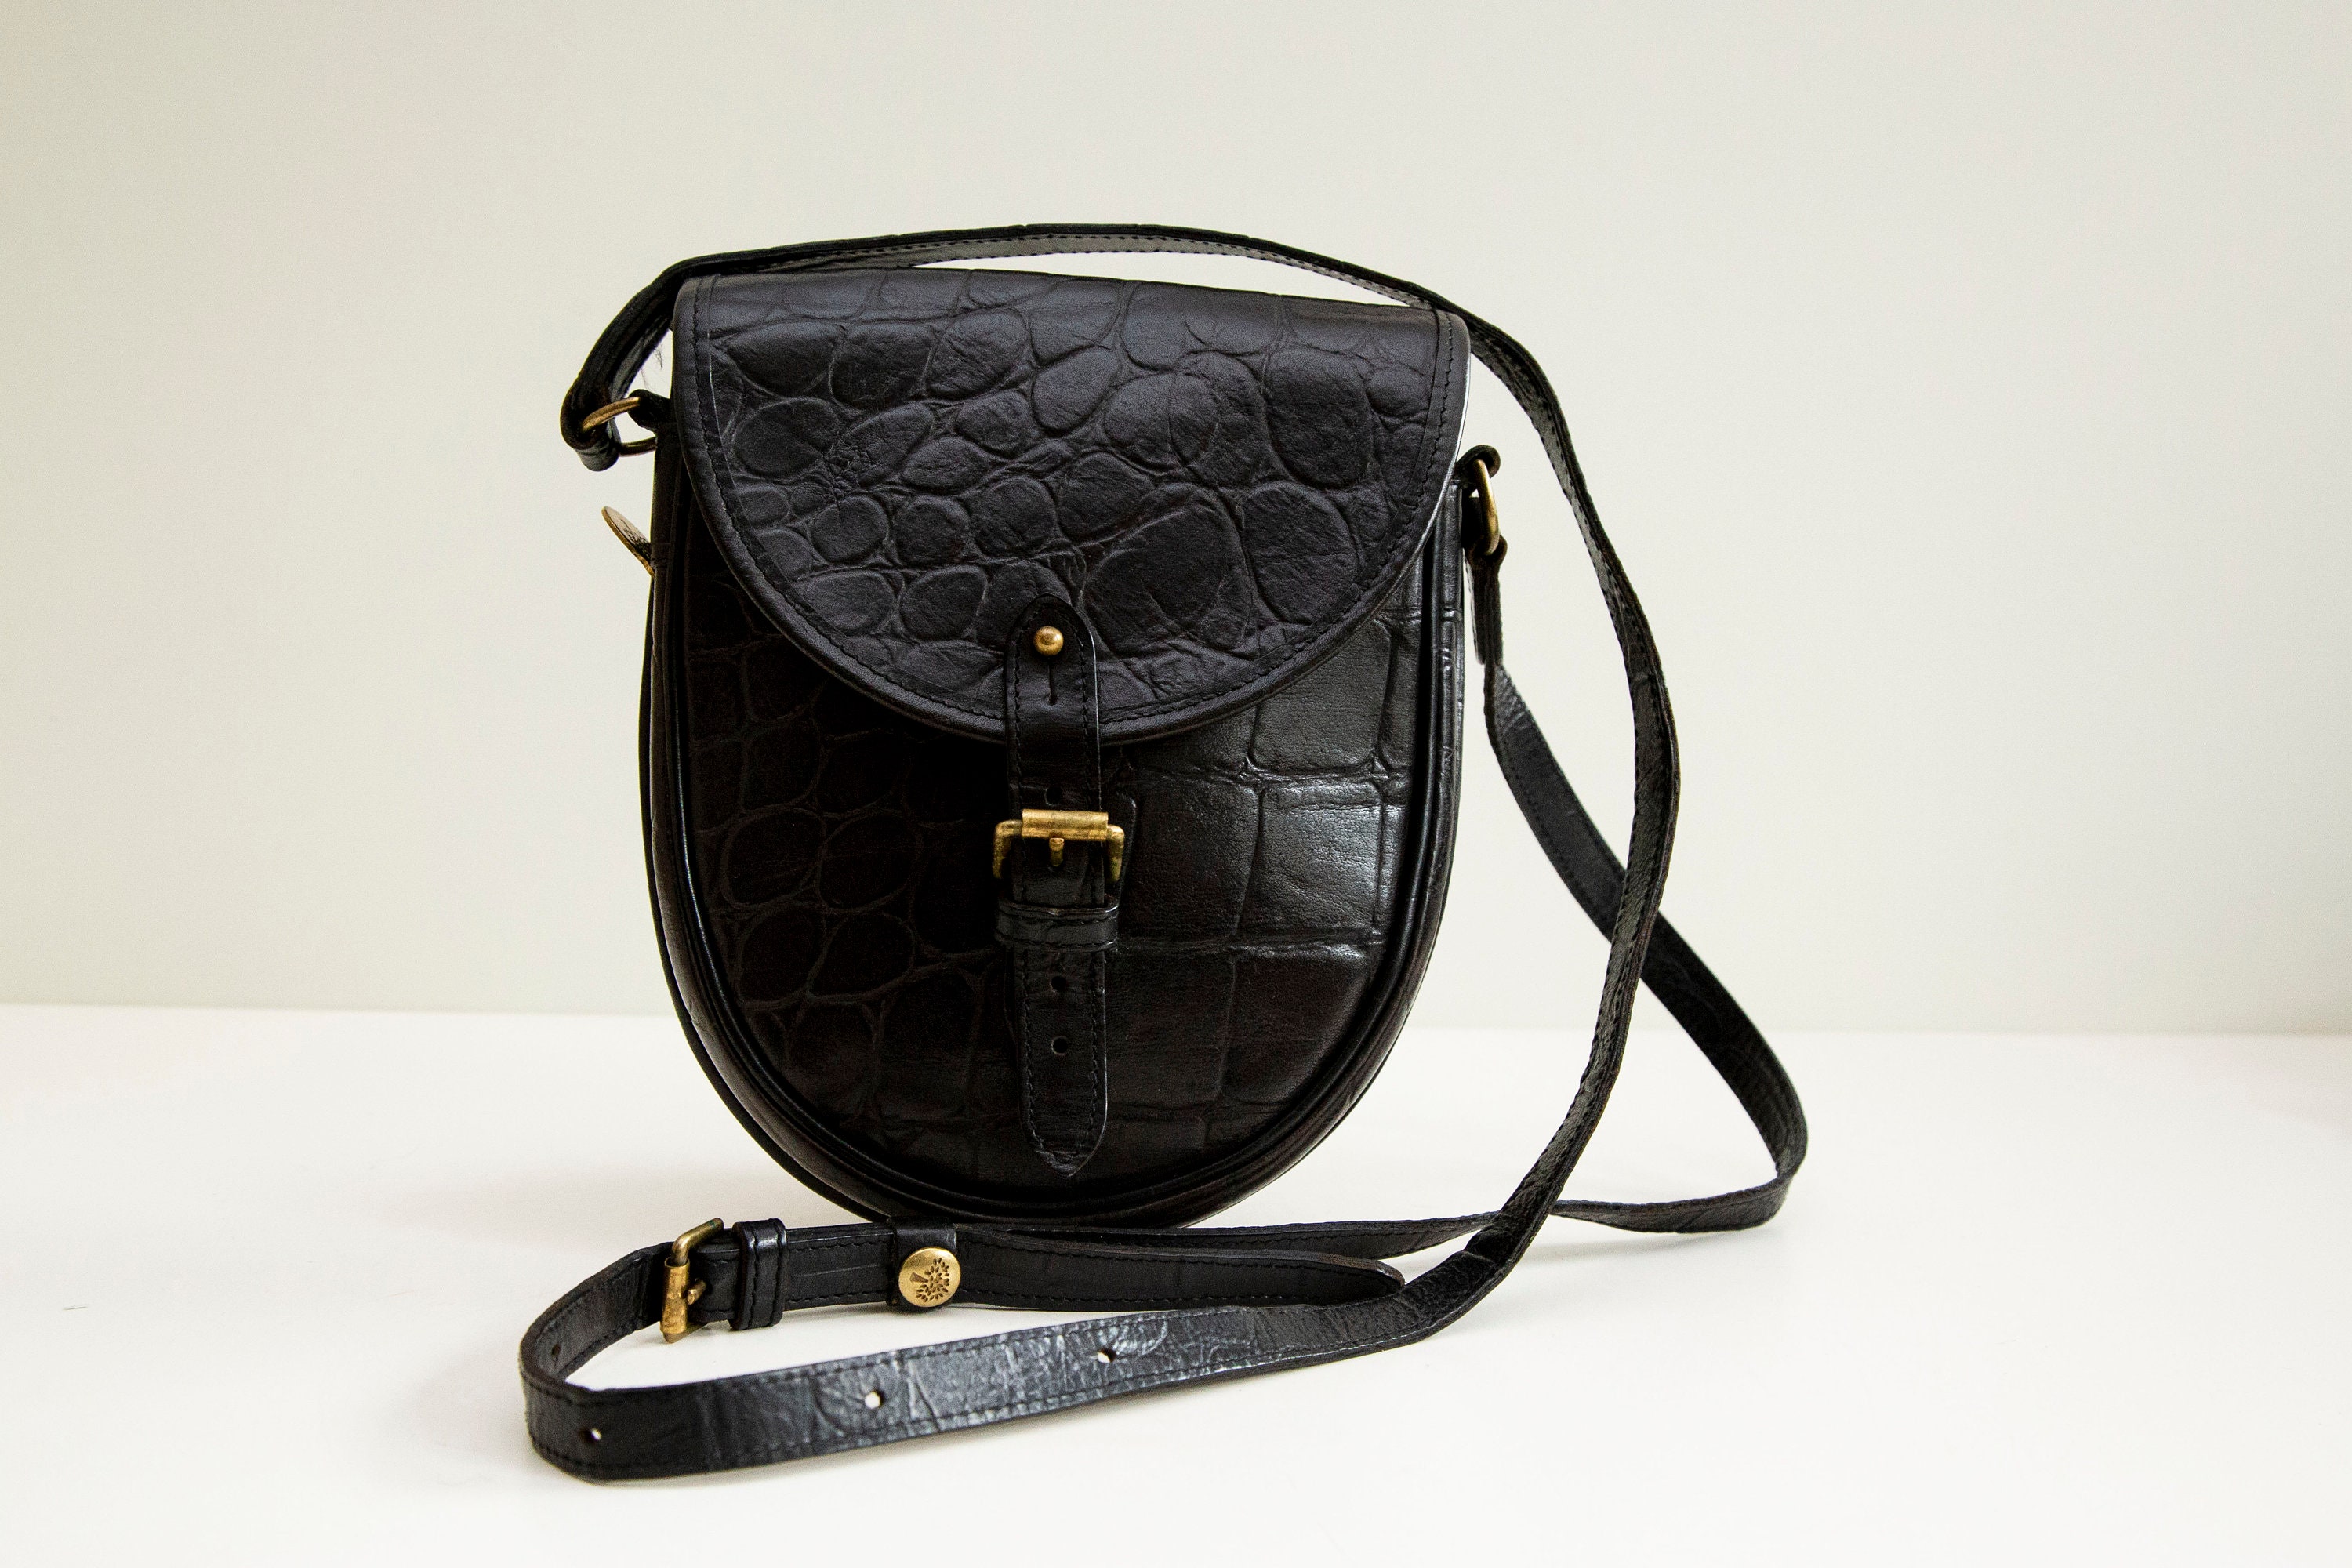 Mulberry, Bags, Mulberry Black Crossbody Leather Bag Gold Hardware